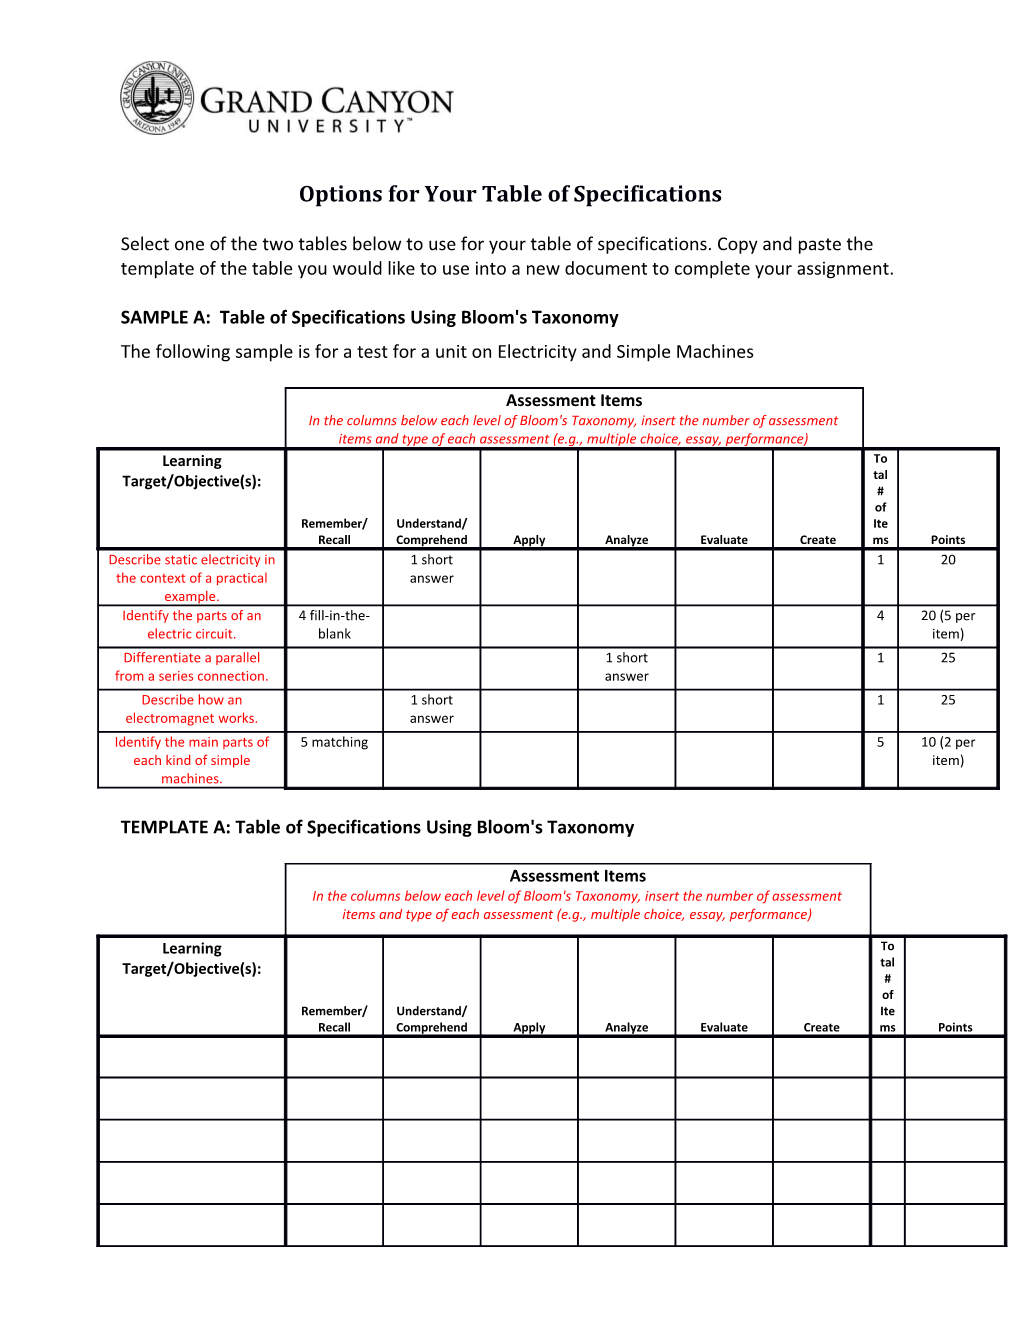 Options for Your Table of Specifications